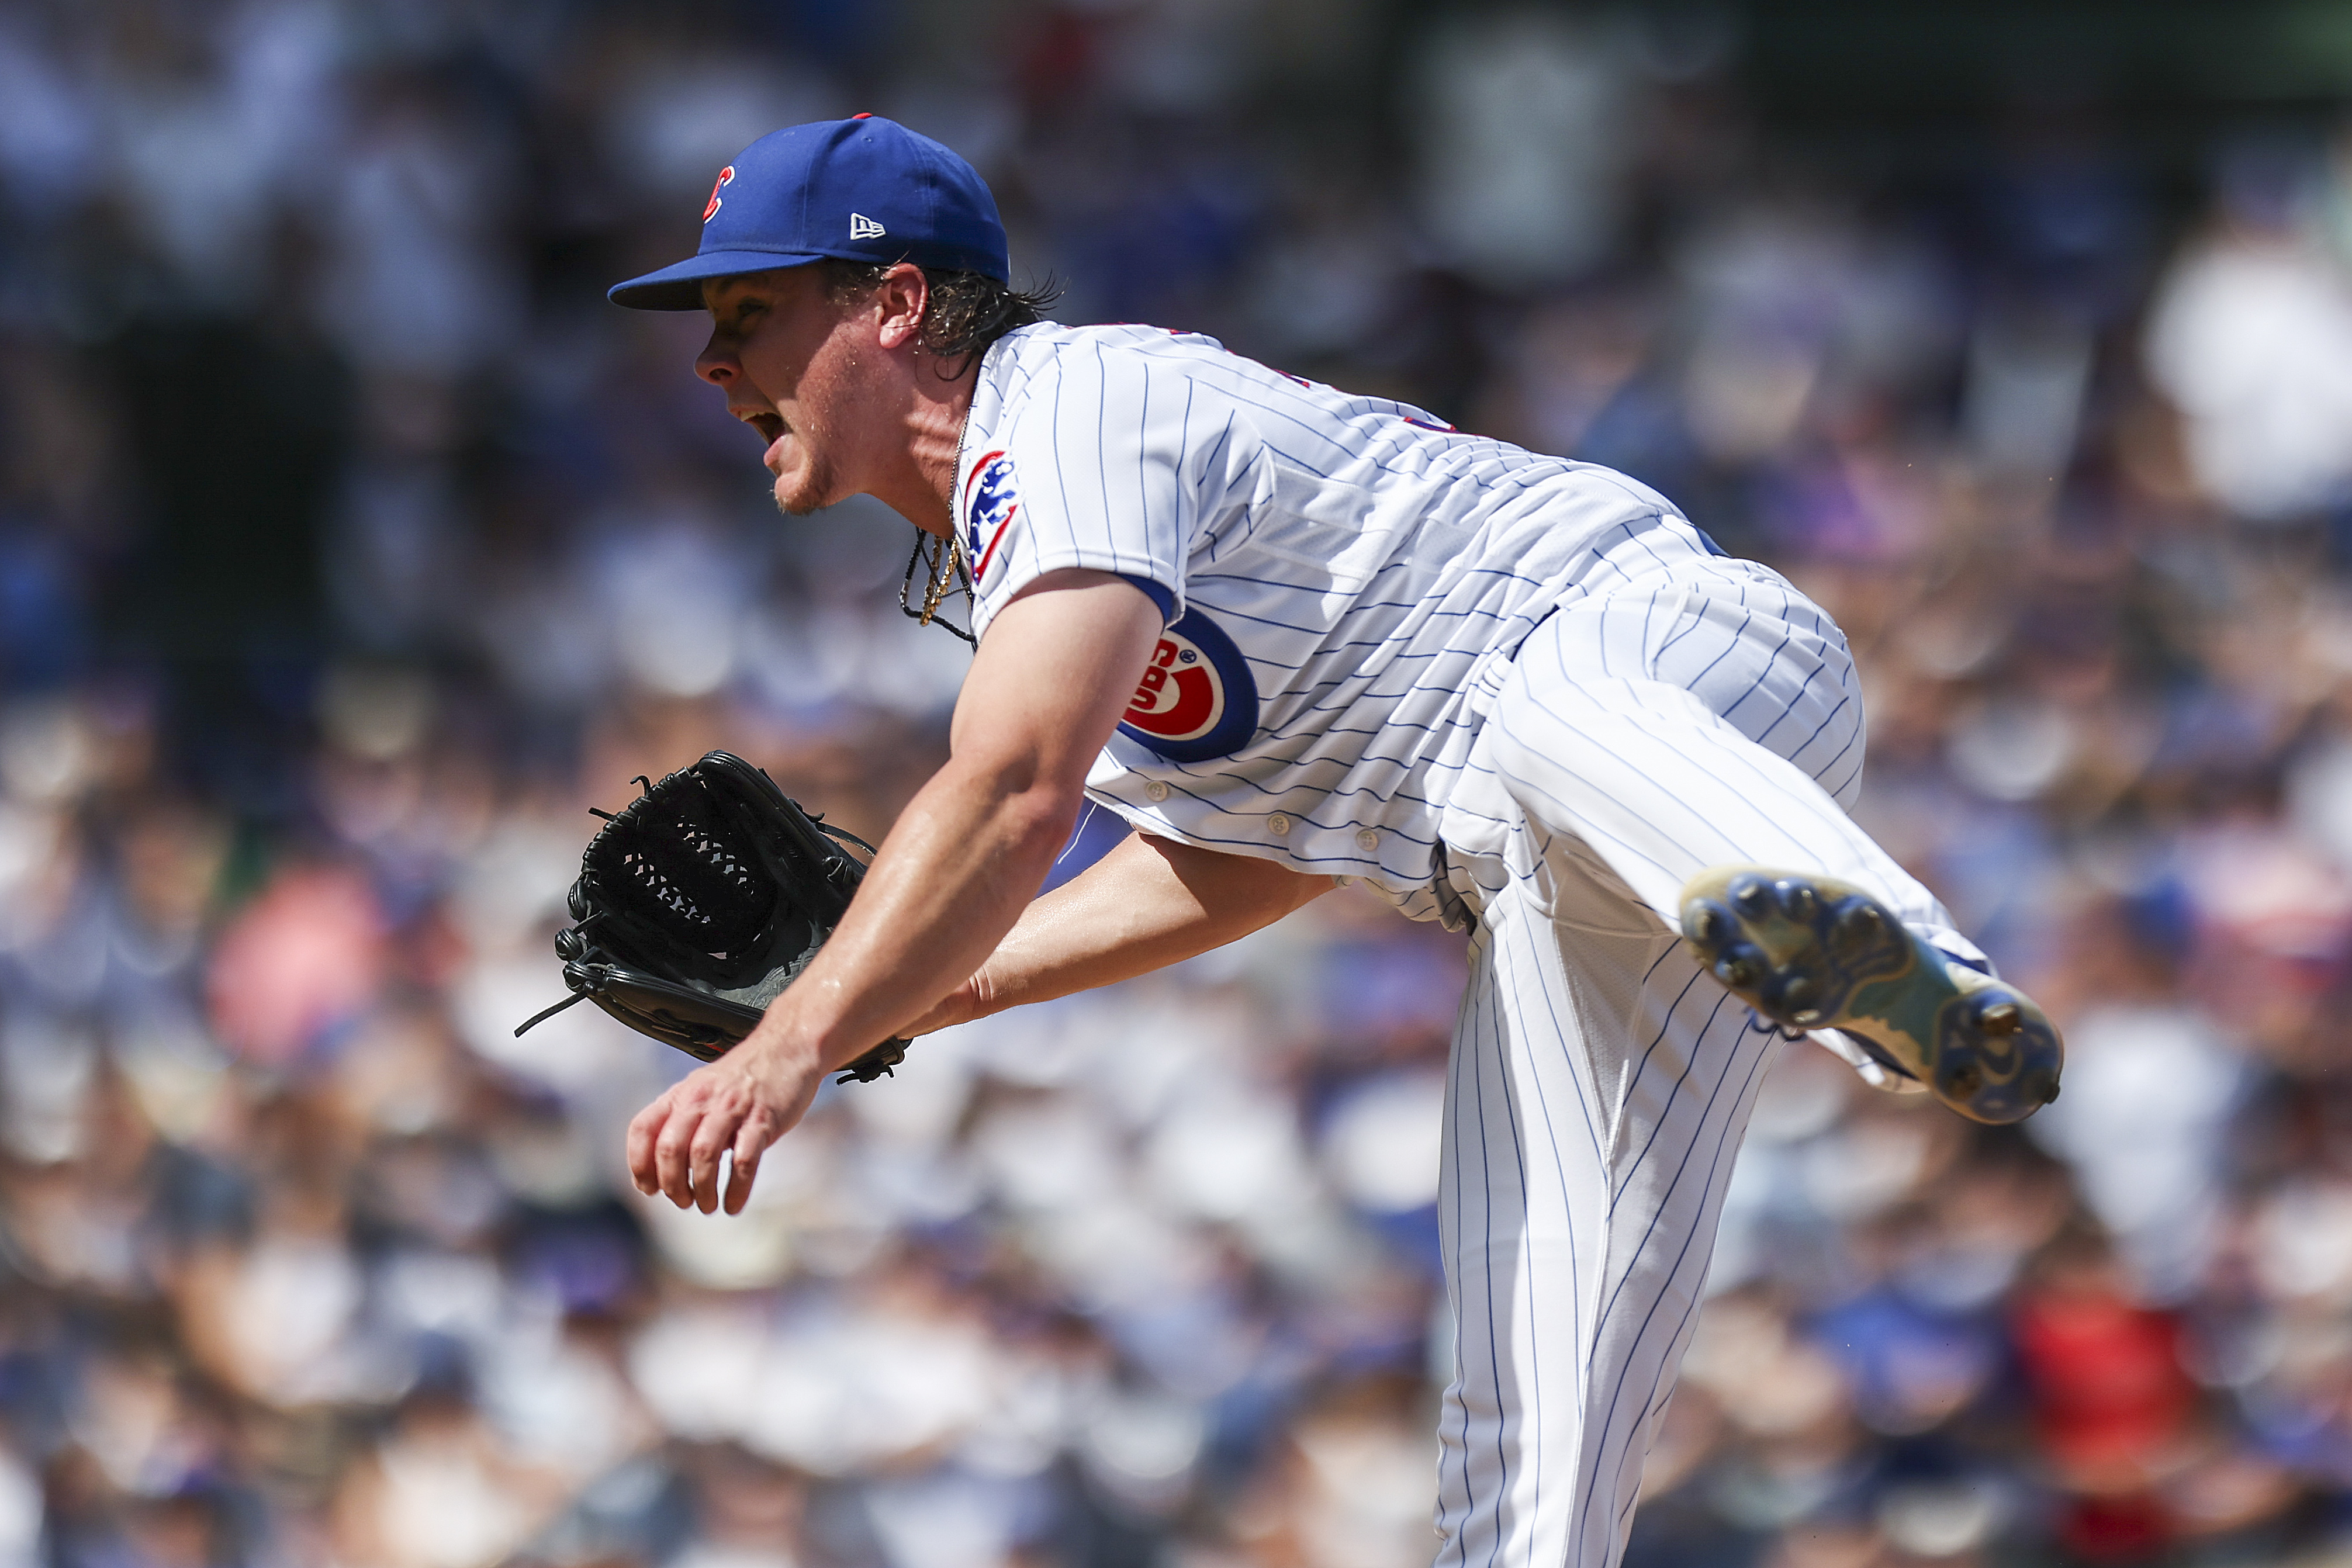 Cubs' Steele dominates Giants in 5-0 win, moves into tie for MLB